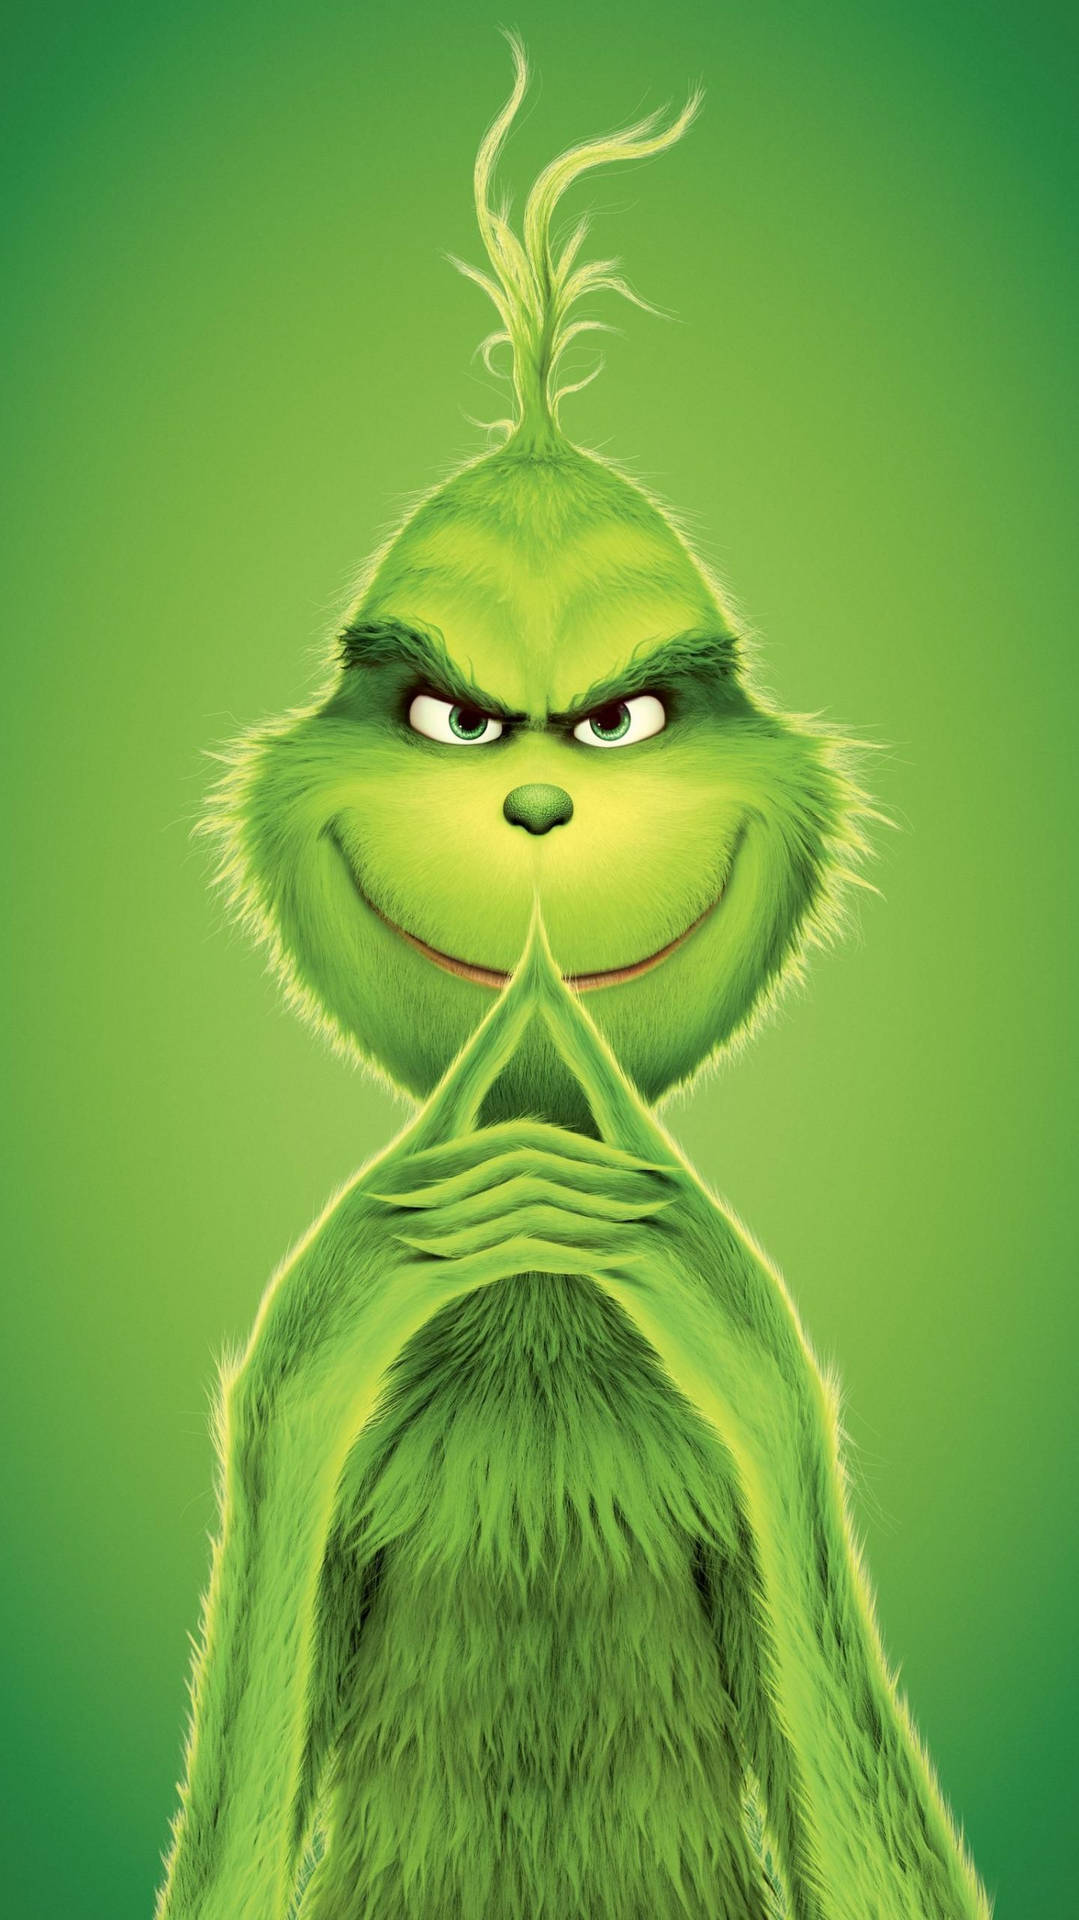 The Grinch Evil Look Background